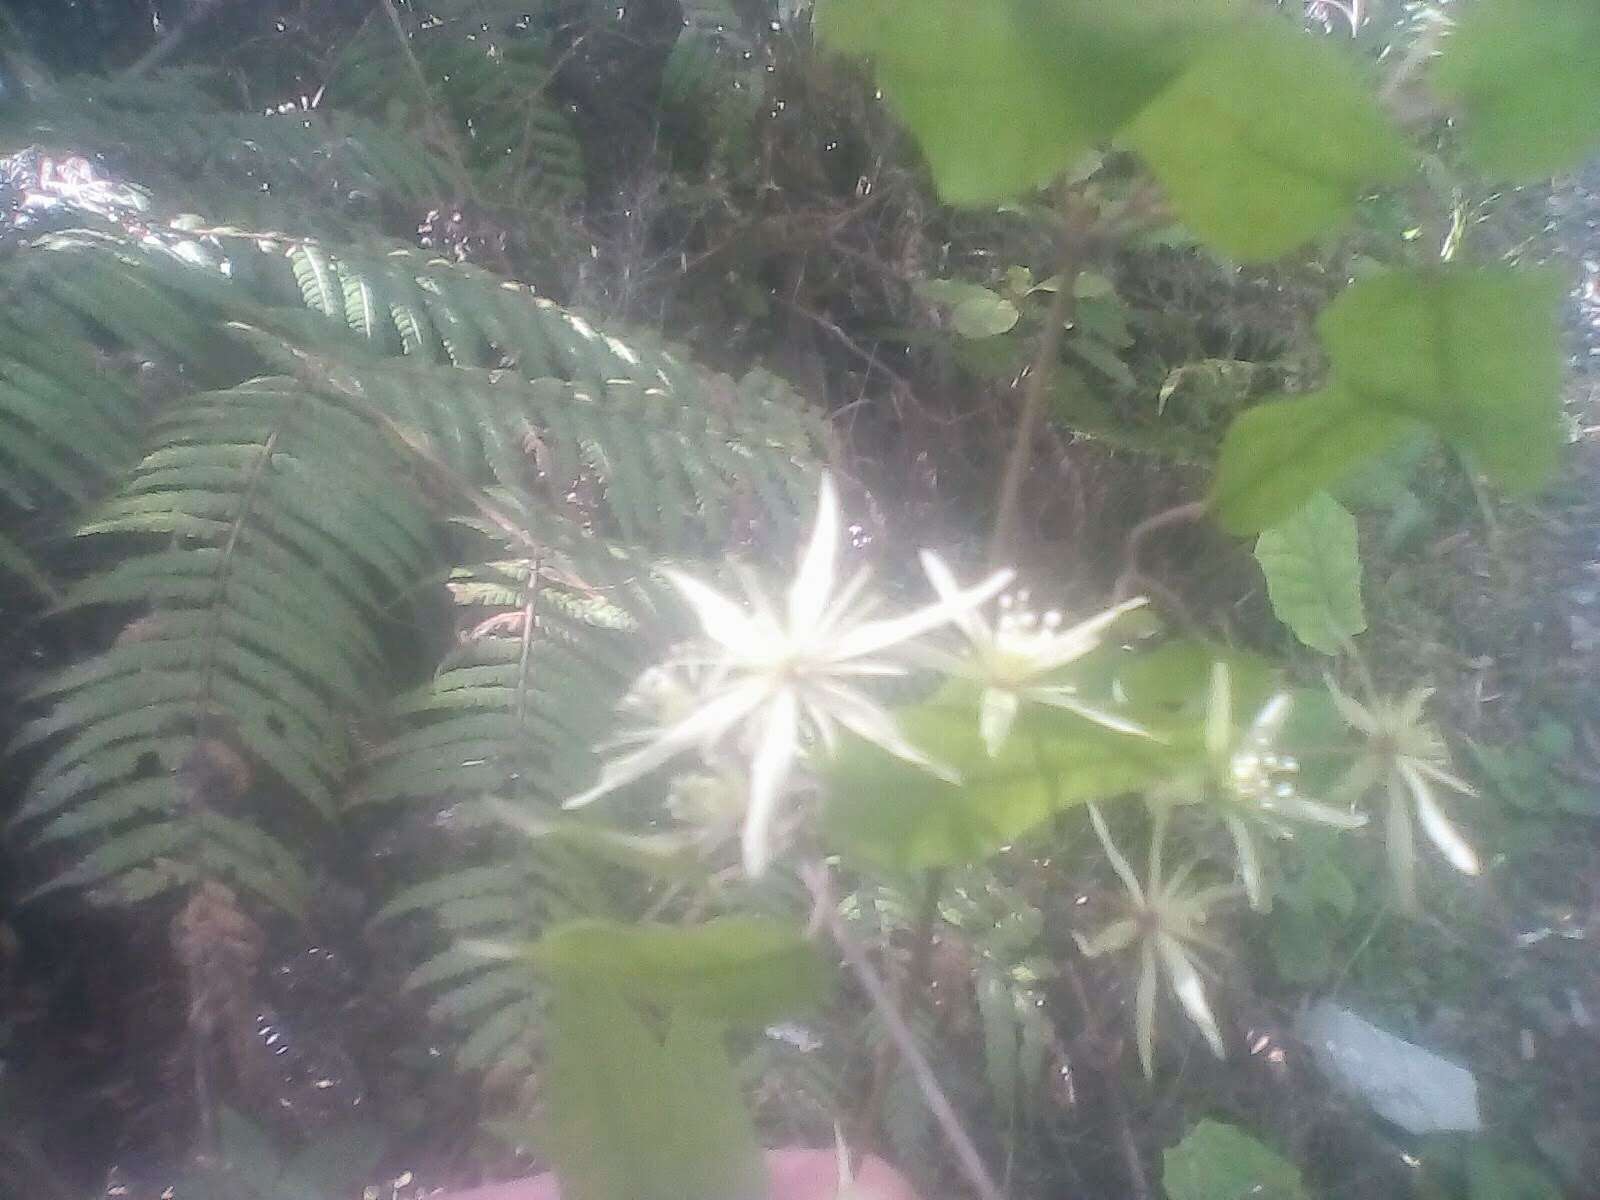 Image of Clematis parviflora A. Cunn.